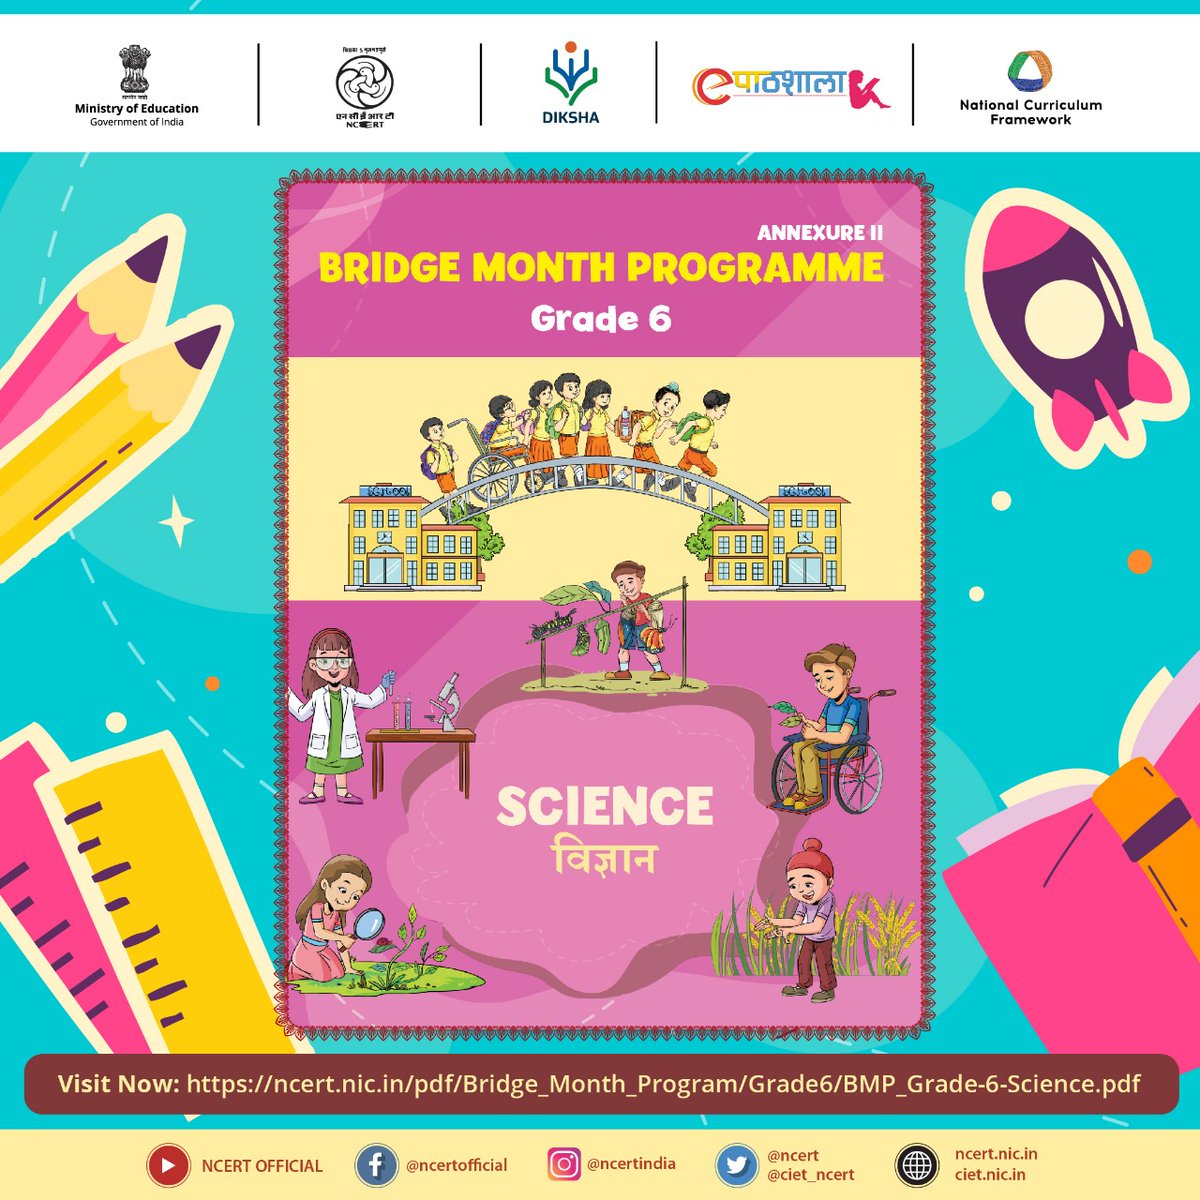 Let's delve into the fascinating world of science! NCERT's Bridge Month Course for Grade 6 Science curriculum for the academic year 2024-2025 is now available. Unlock the wonders of science education: ncert.nic.in/pdf/Bridge_Mon…

#Science #Grade6 #NCERT #EducationForAll…